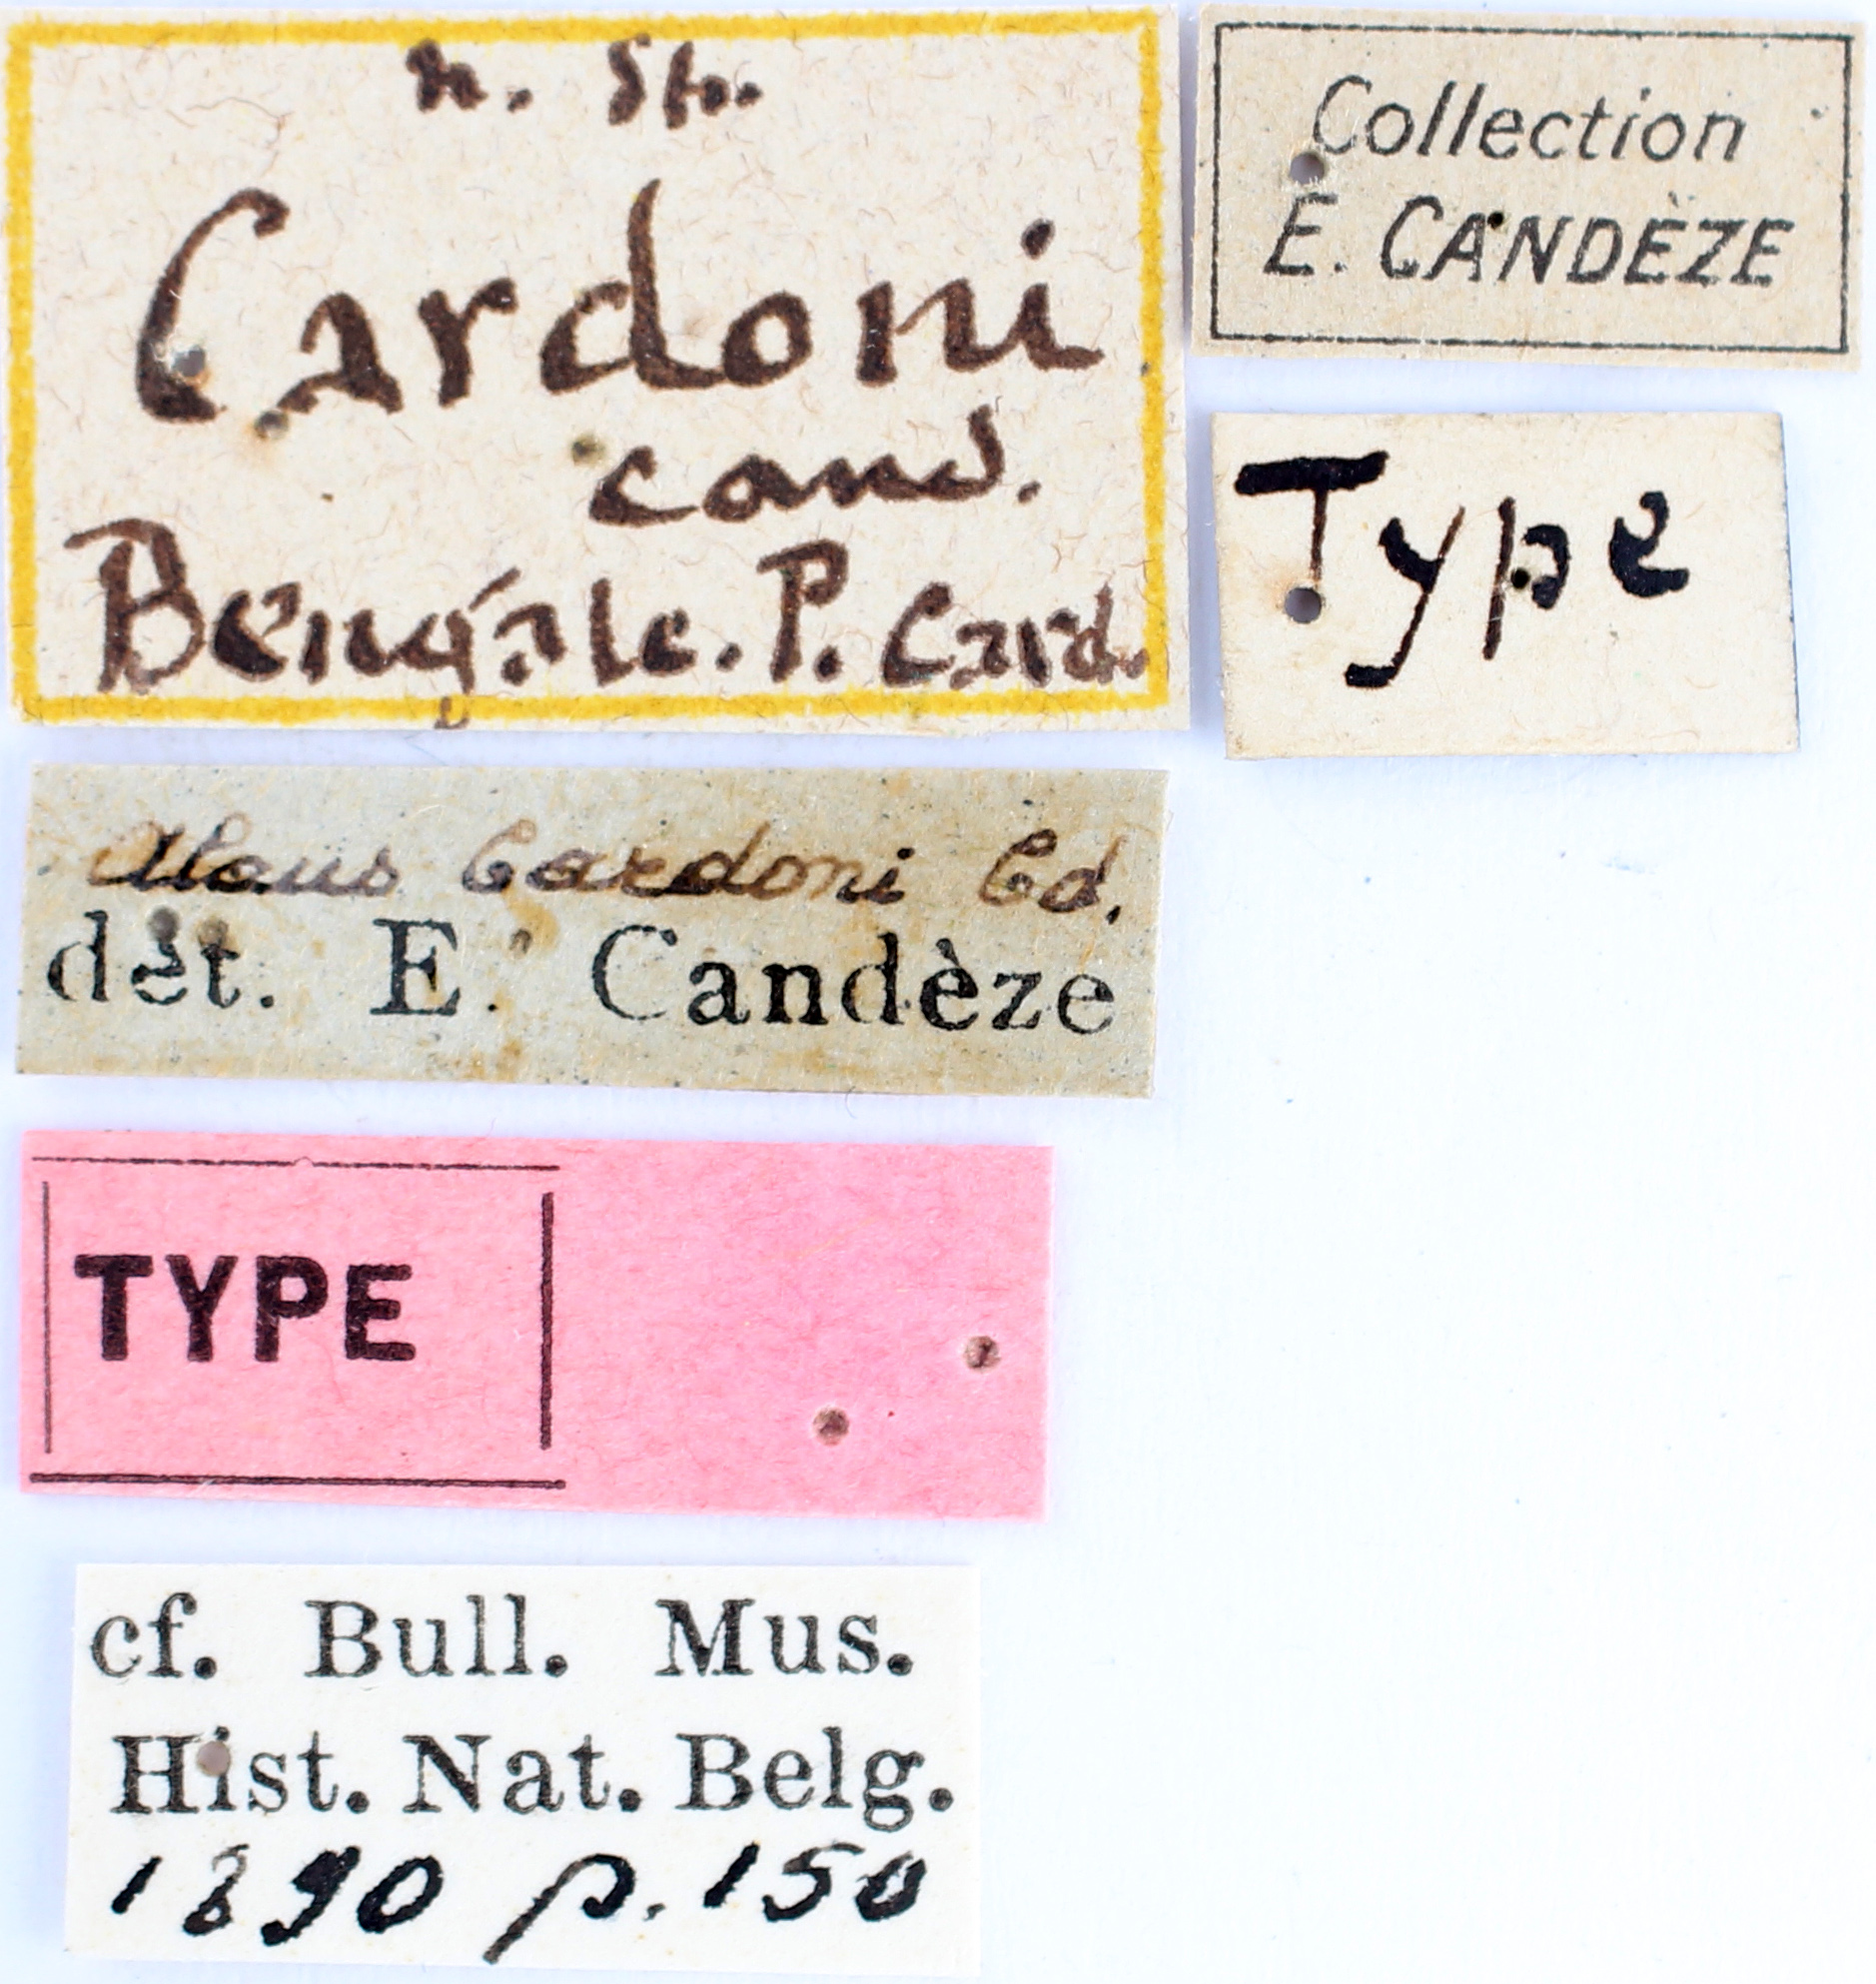 BE-RBINS-ENT Alaus cardoni Type Labels Jerome Constant.JPG